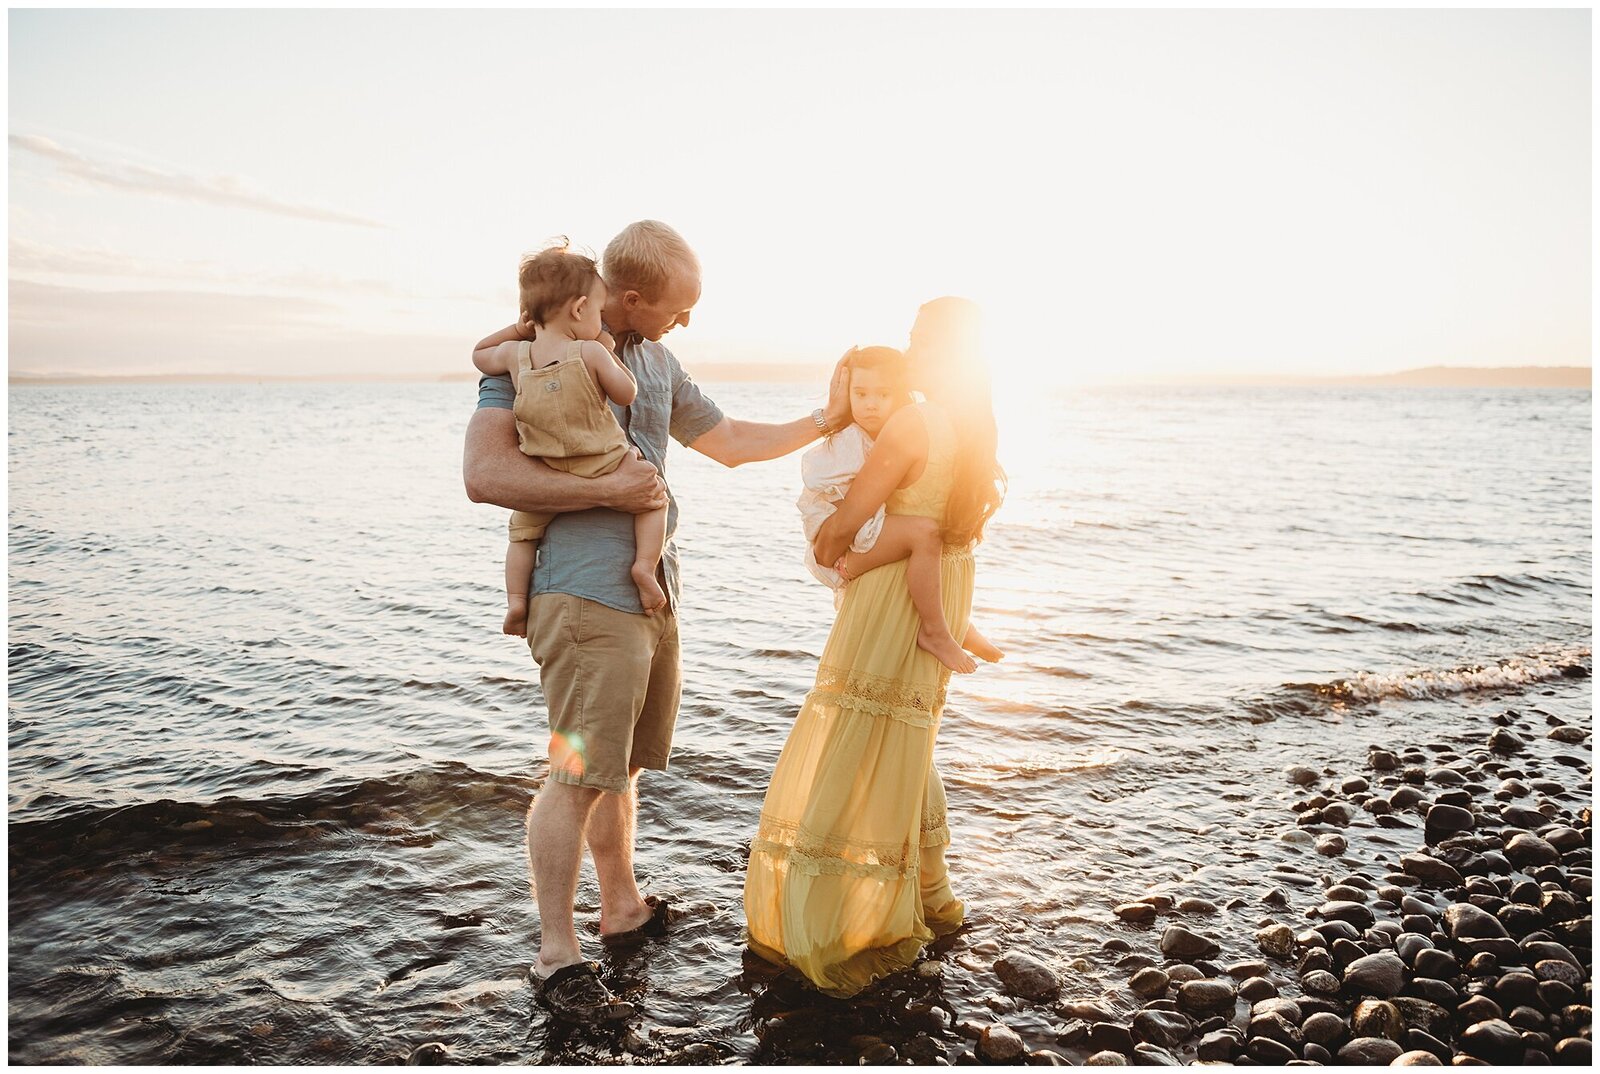 Family of 4 in water on beach at sunset Emily Ann Photography Seattle Photographer